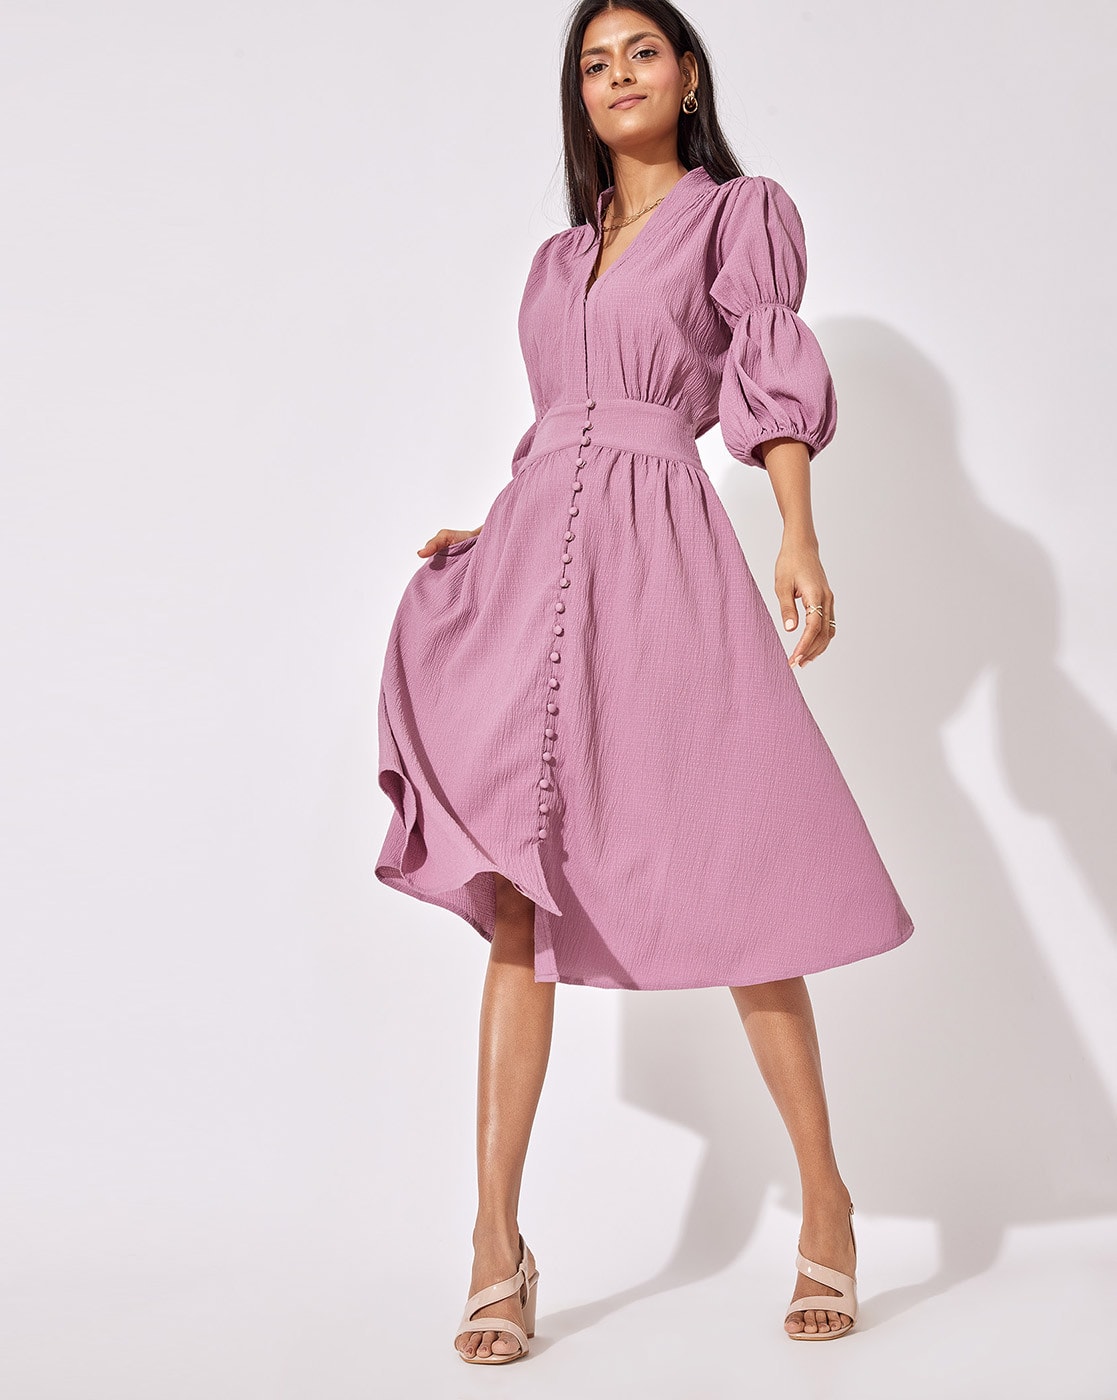 Buy Purple Dresses for Women by The Label Life Online